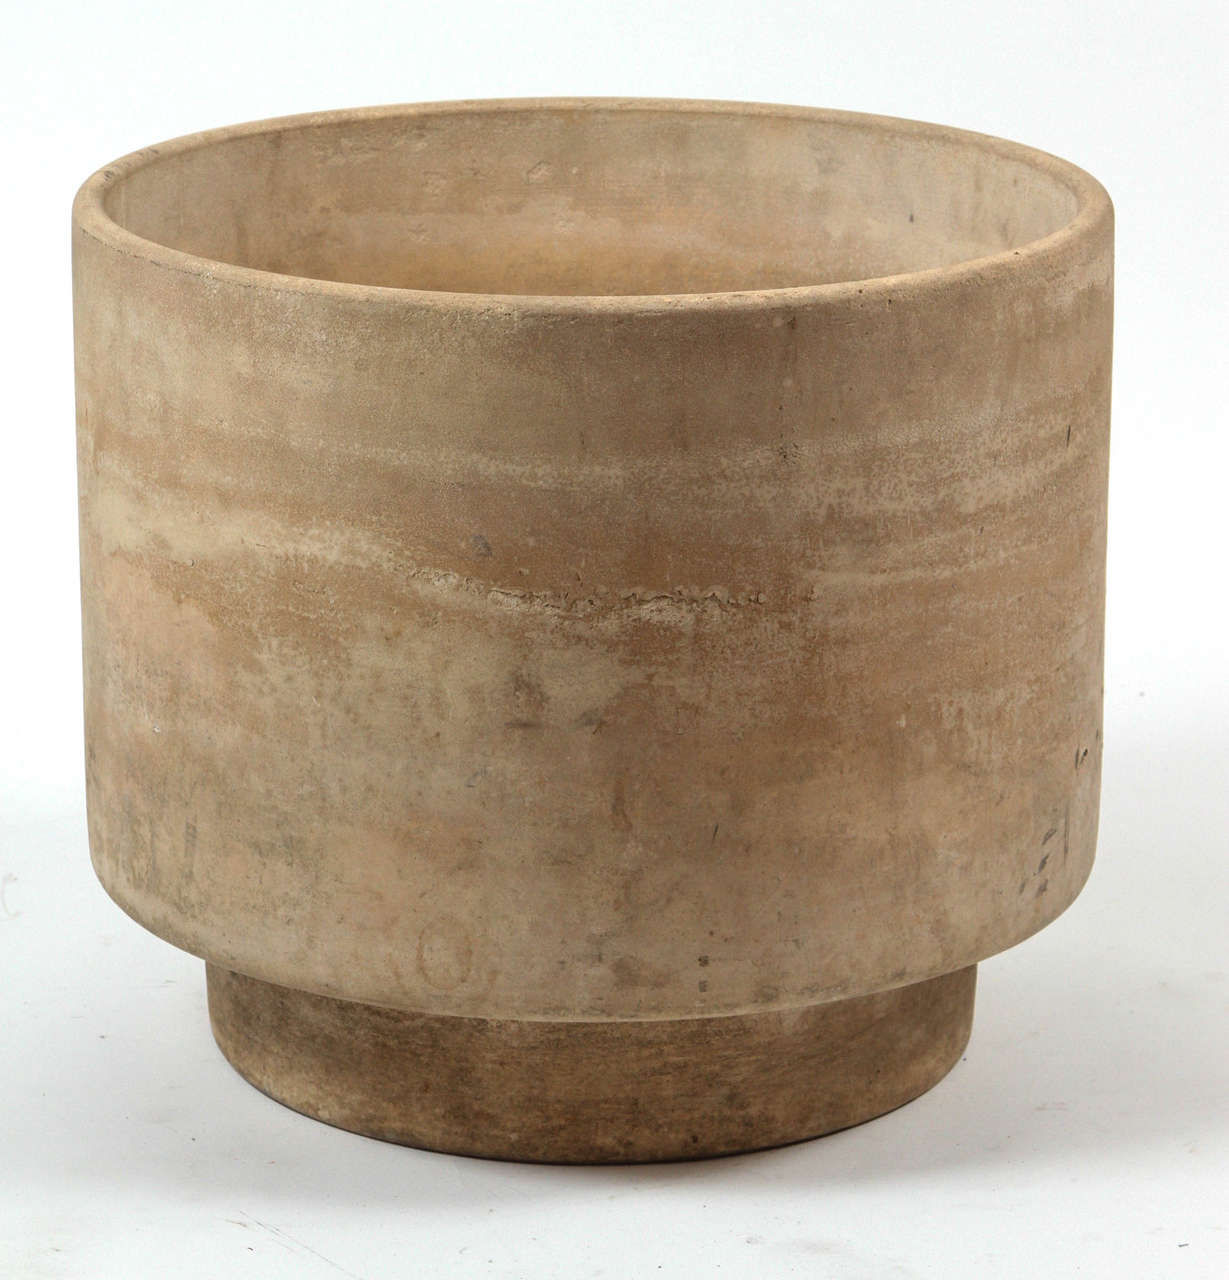 Patinated bisque planter in the style of Architectural Pottery. Made in USA, circa 1950s.